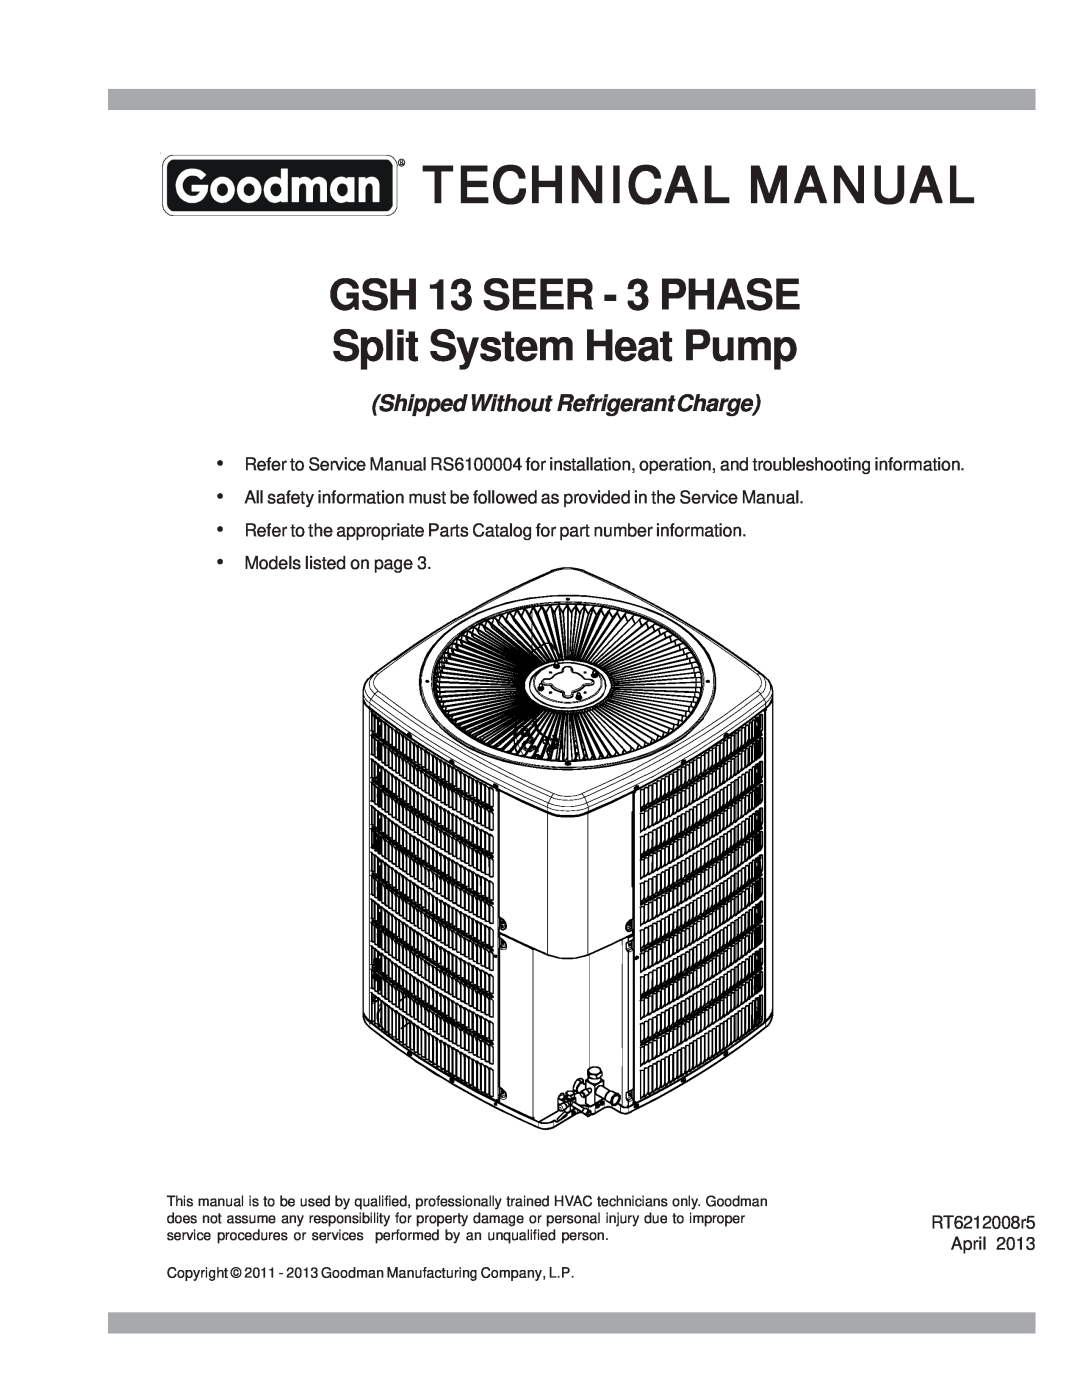 Goodmans GSH 13 SEER - 3 Phase Split System Heat Pump service manual Technical Manual, ShippedWithout RefrigerantCharge 